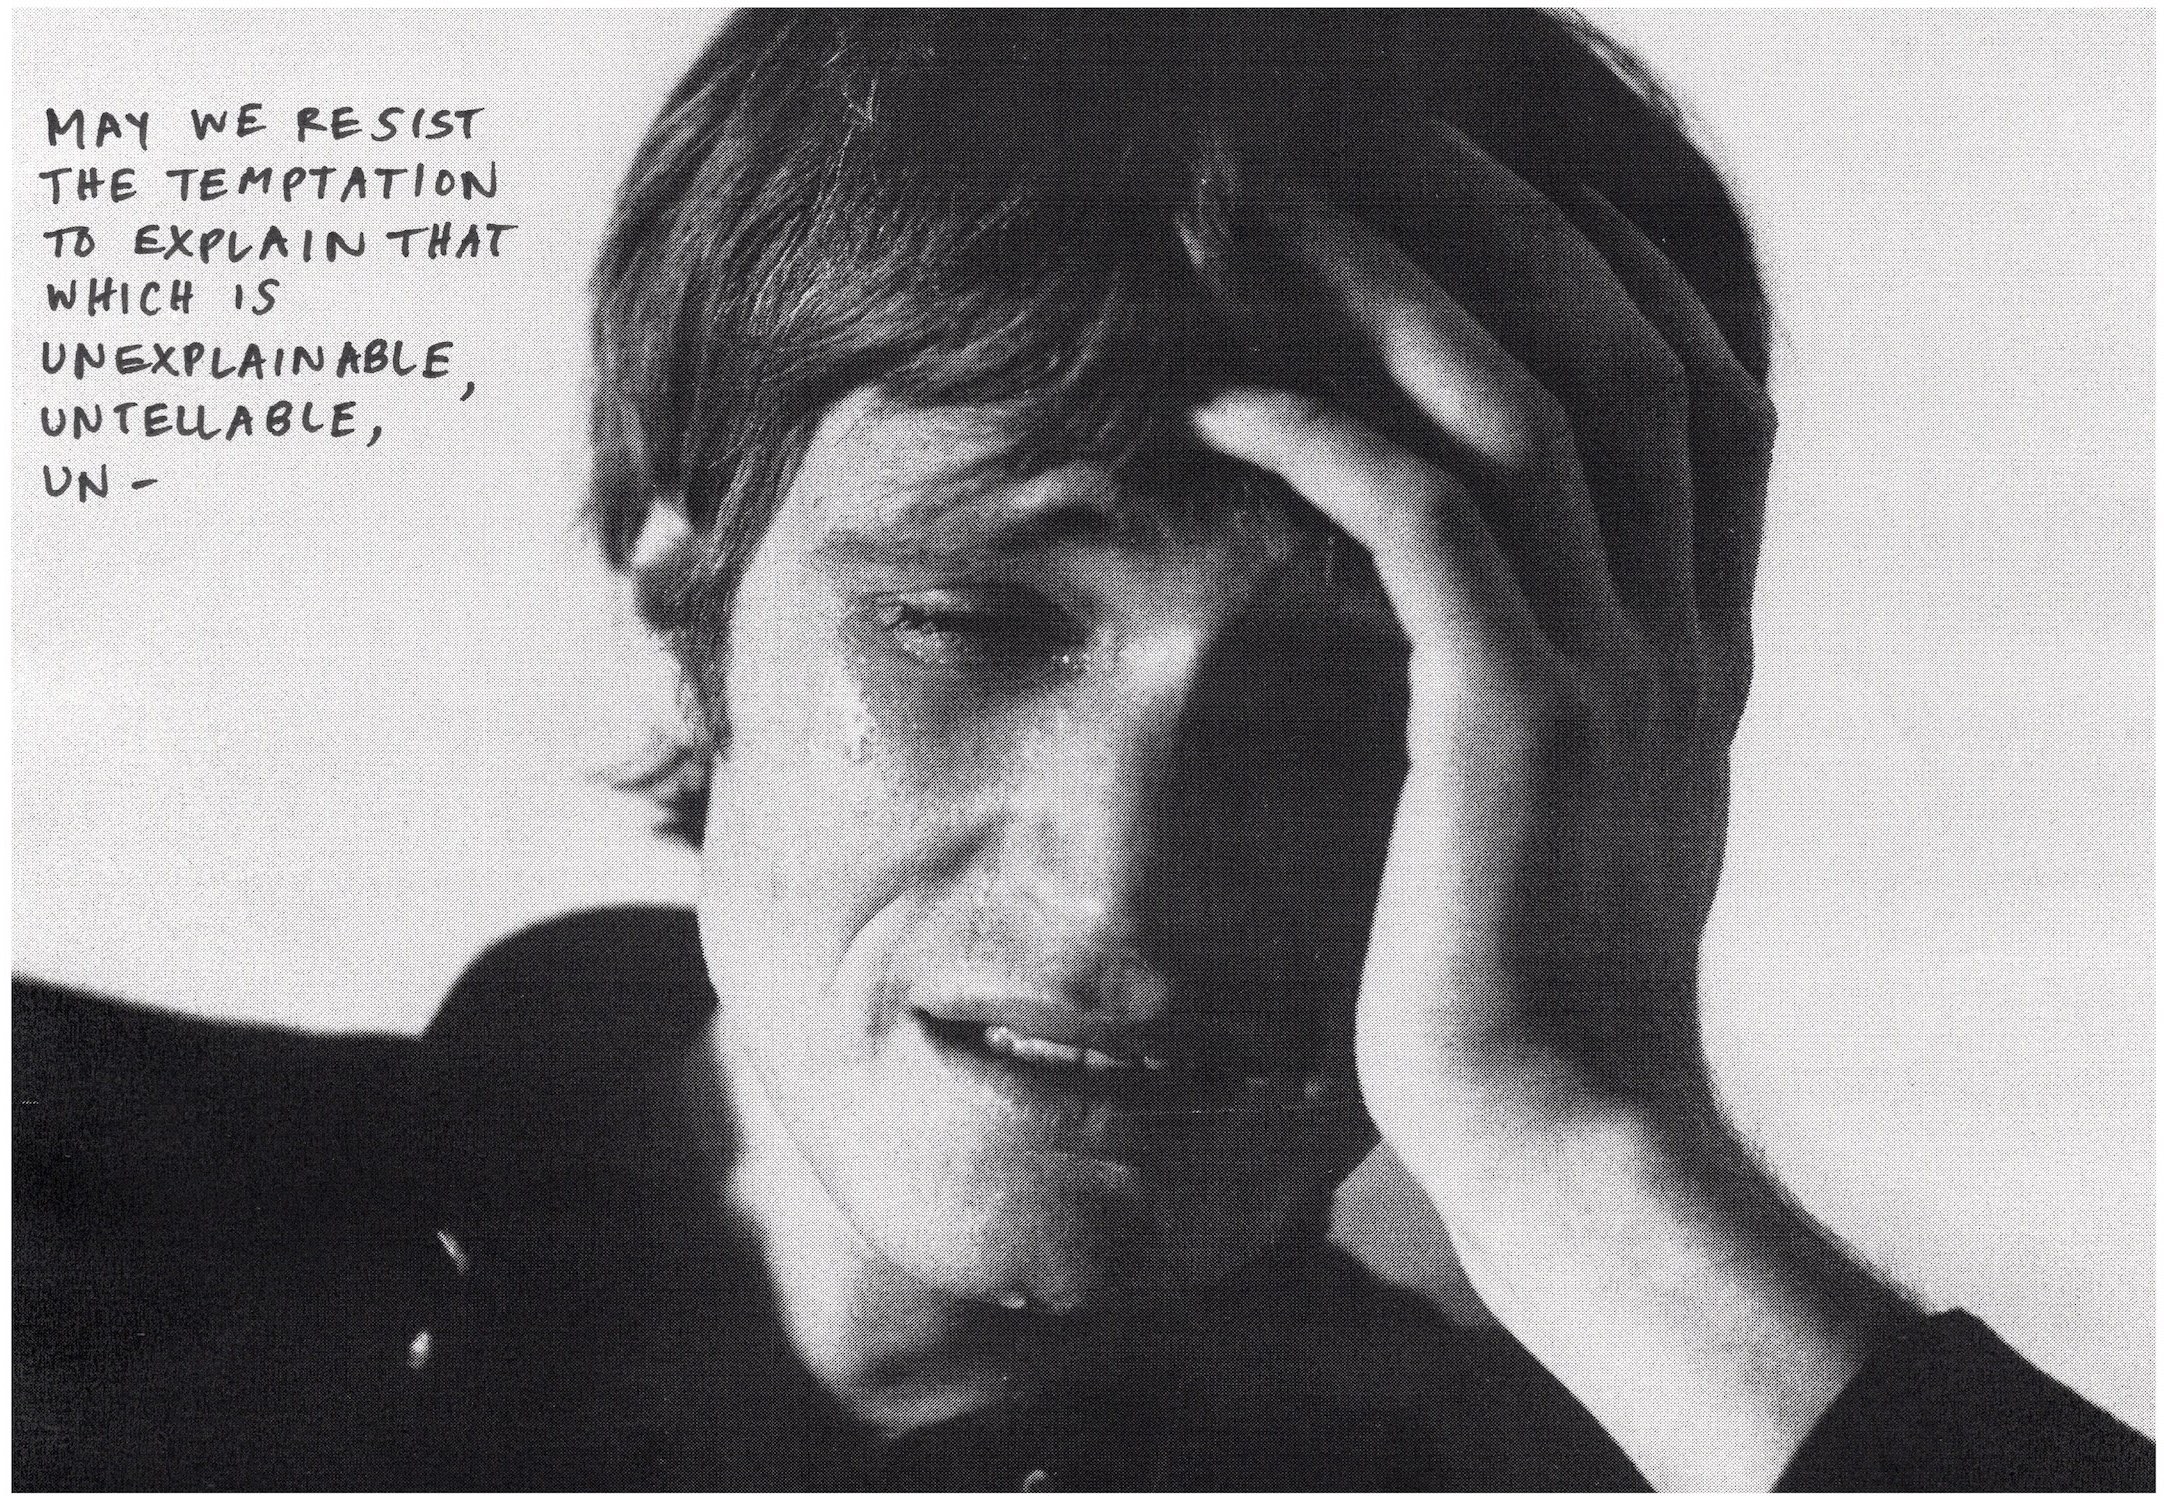 A close up photograph of the artist Bas Jan Ader fills the page, it has the texture of a photocopy. Their head is in their hand, tears running down their face. The artist Phoebe Rex has written in the top left hand corner, May we resist the temptation to explain that which is unexplainable, untellable, un…